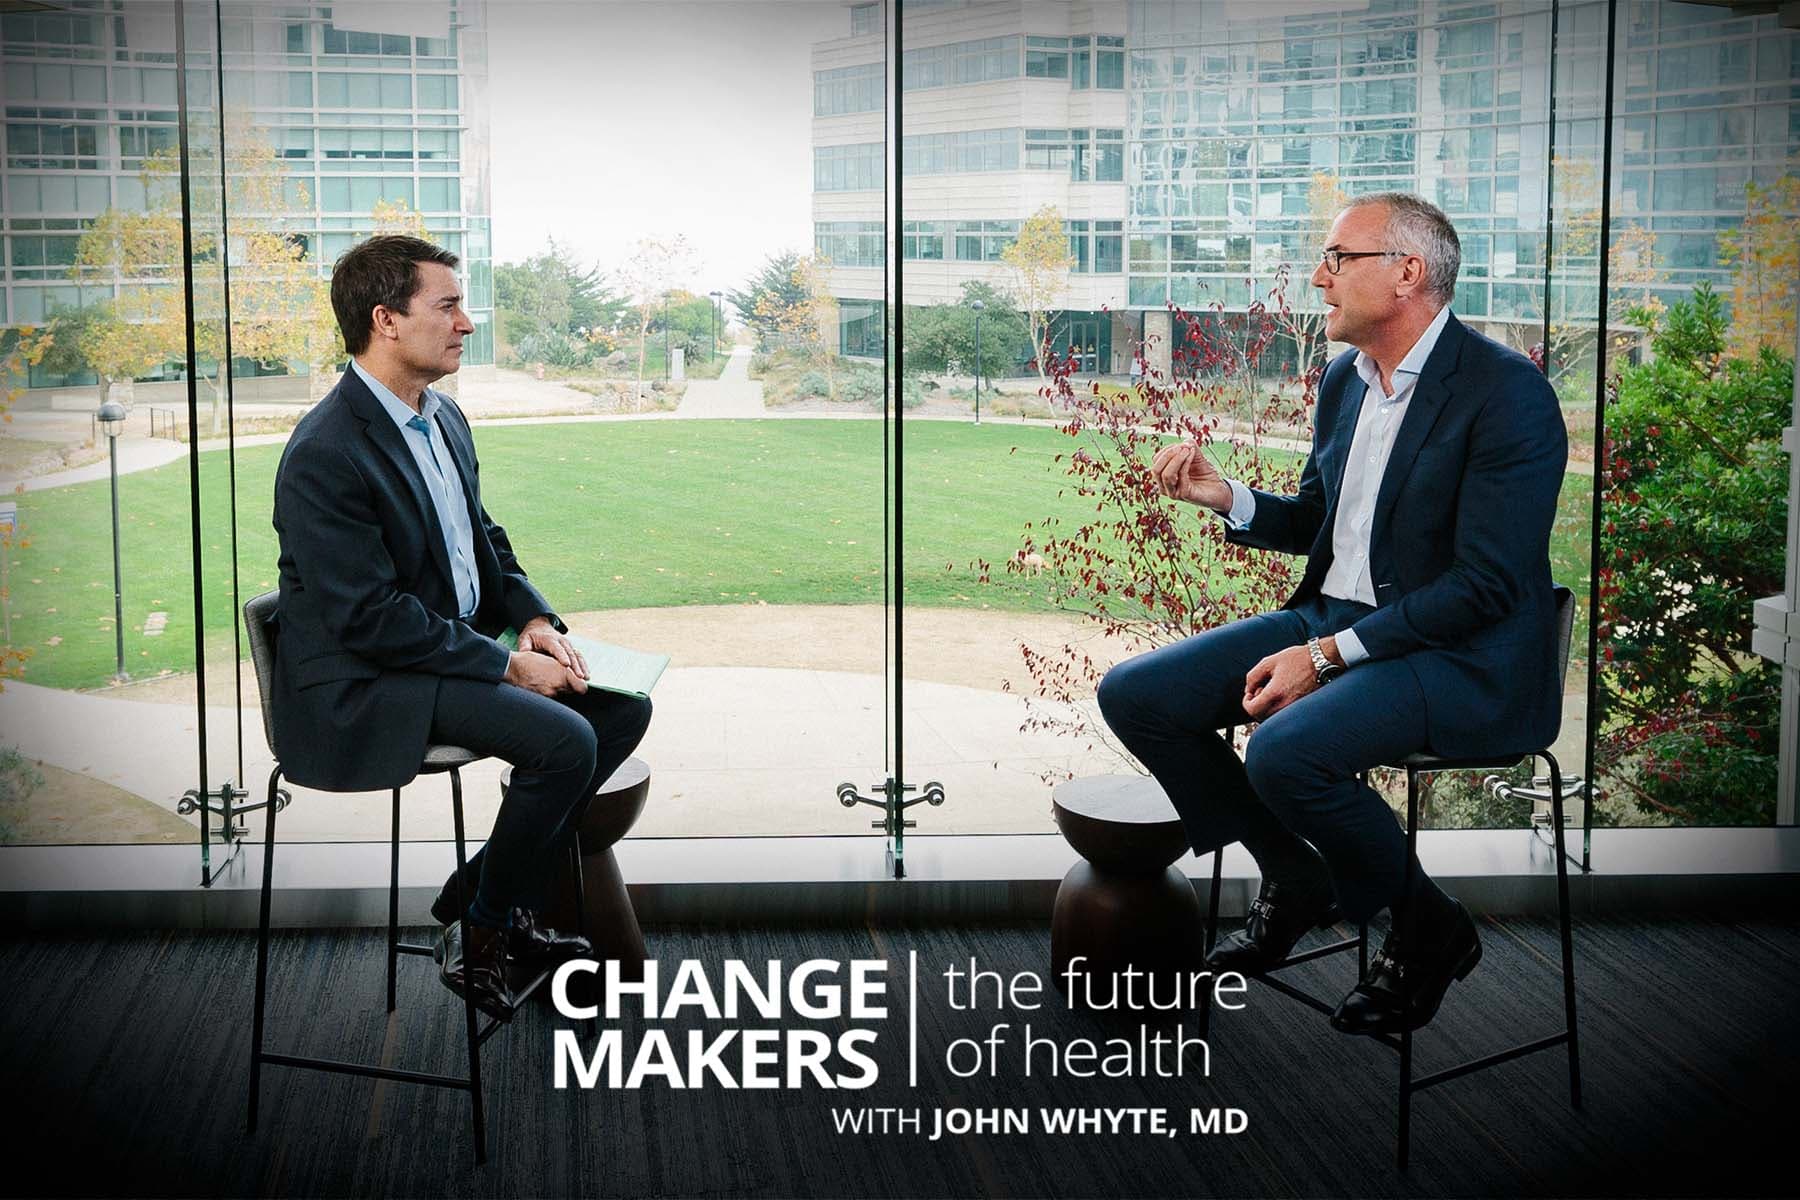 Change Makers: The Future of Health still